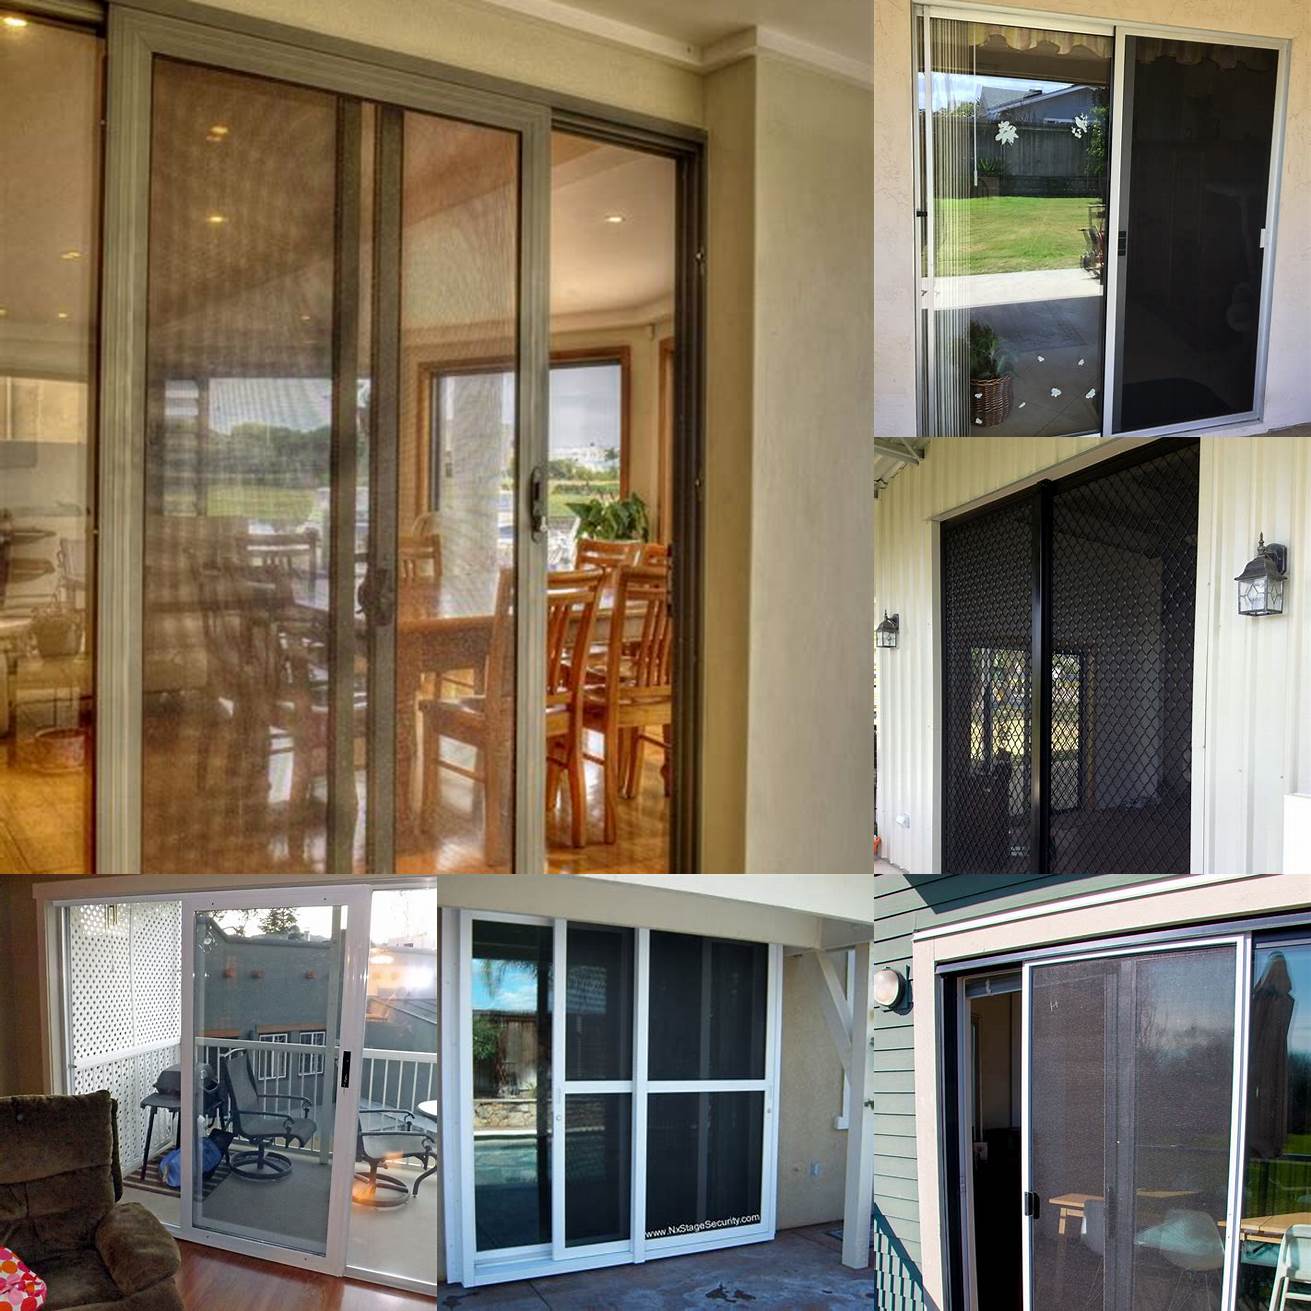 A sliding screen door with a built-in security lock